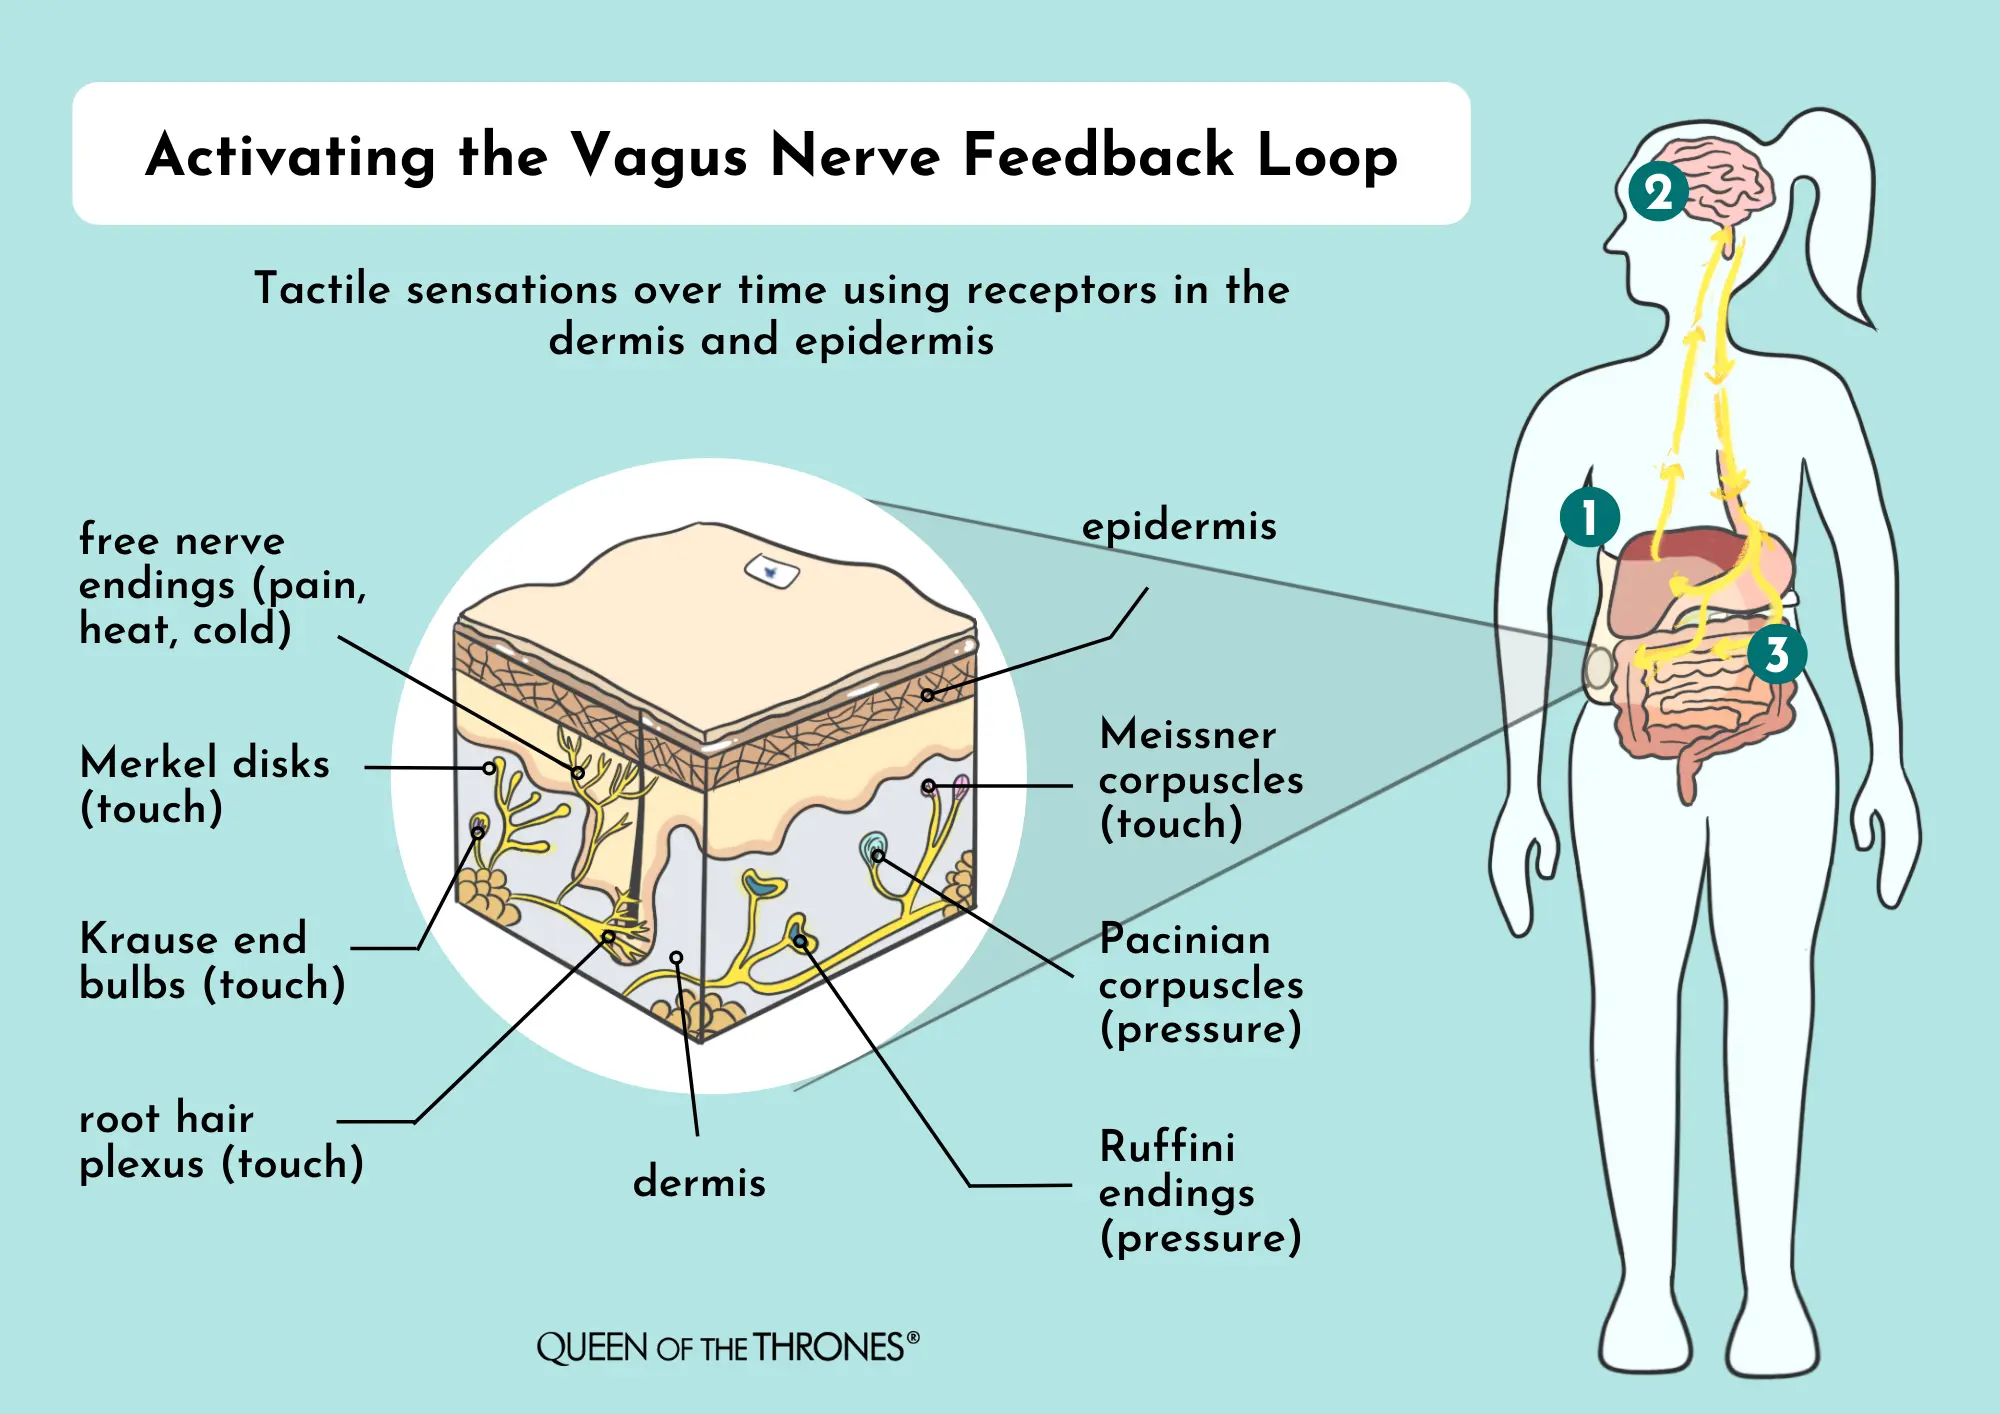 Queen of the Thrones Castor Oil Packs Help you to activate the Vagus Nerve feedback